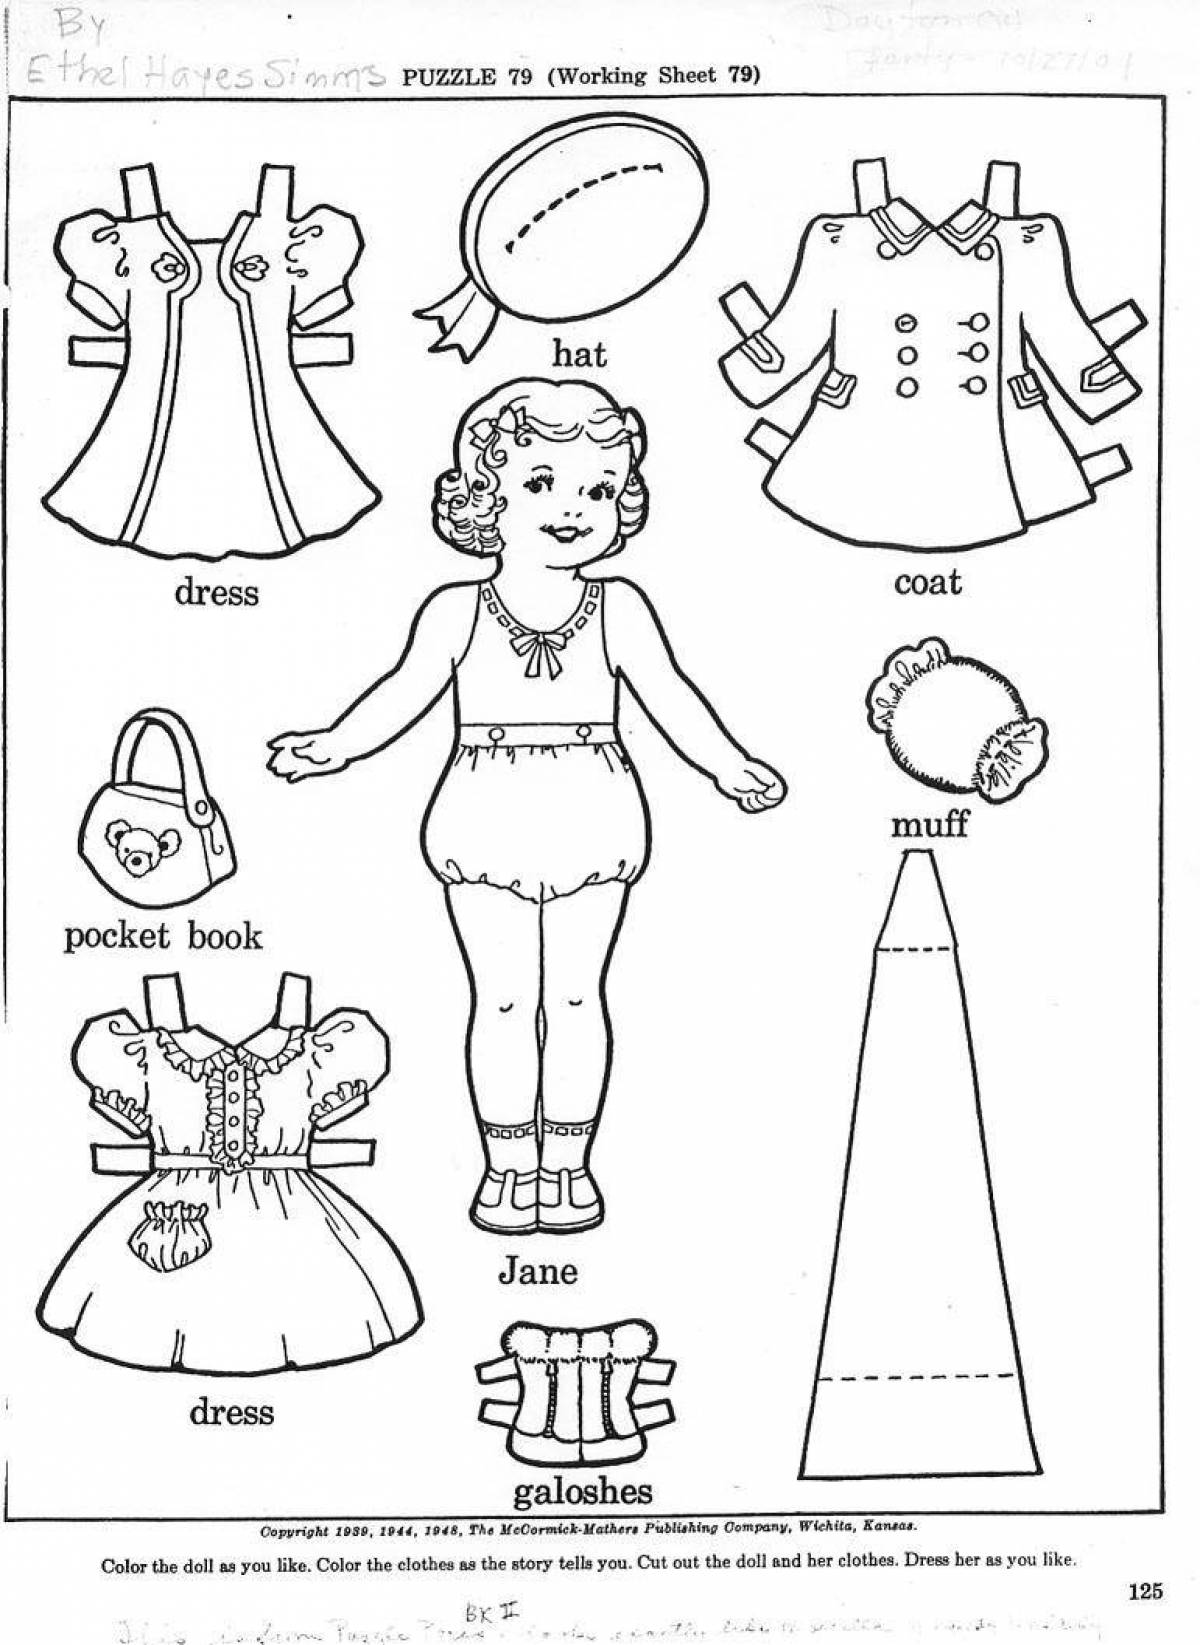 Lovely paper dolls with clothes